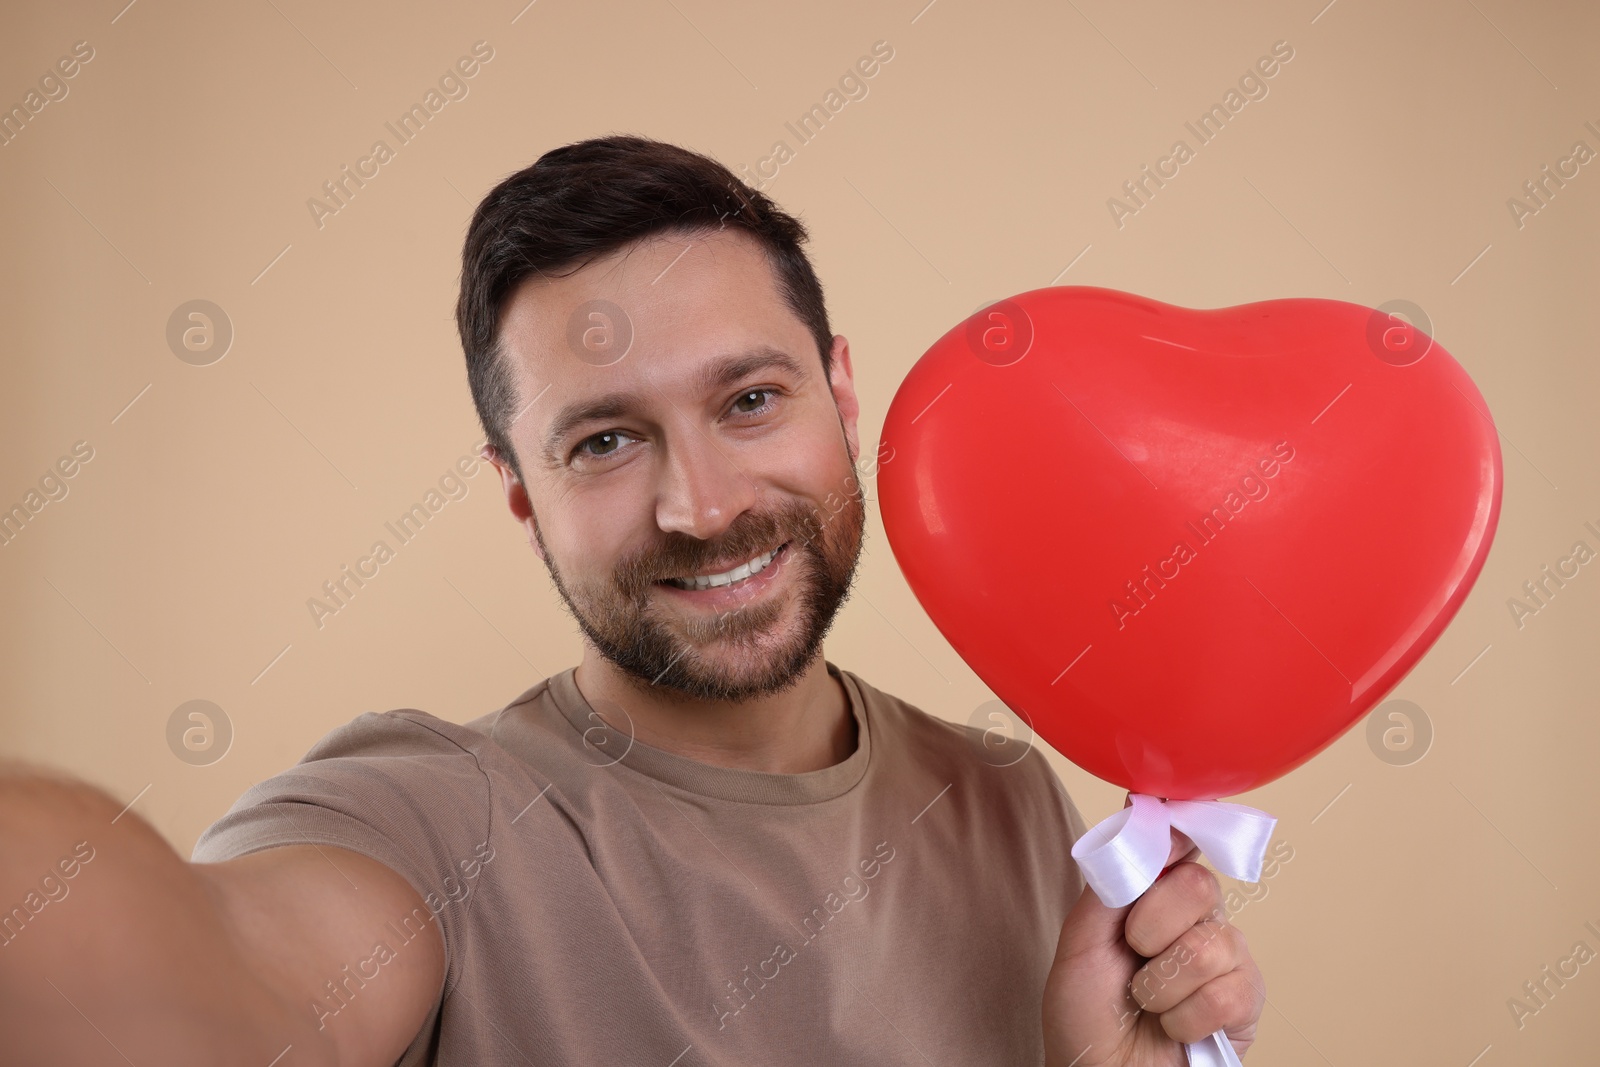 Photo of Man holding red heart shaped balloon and taking selfie on beige background